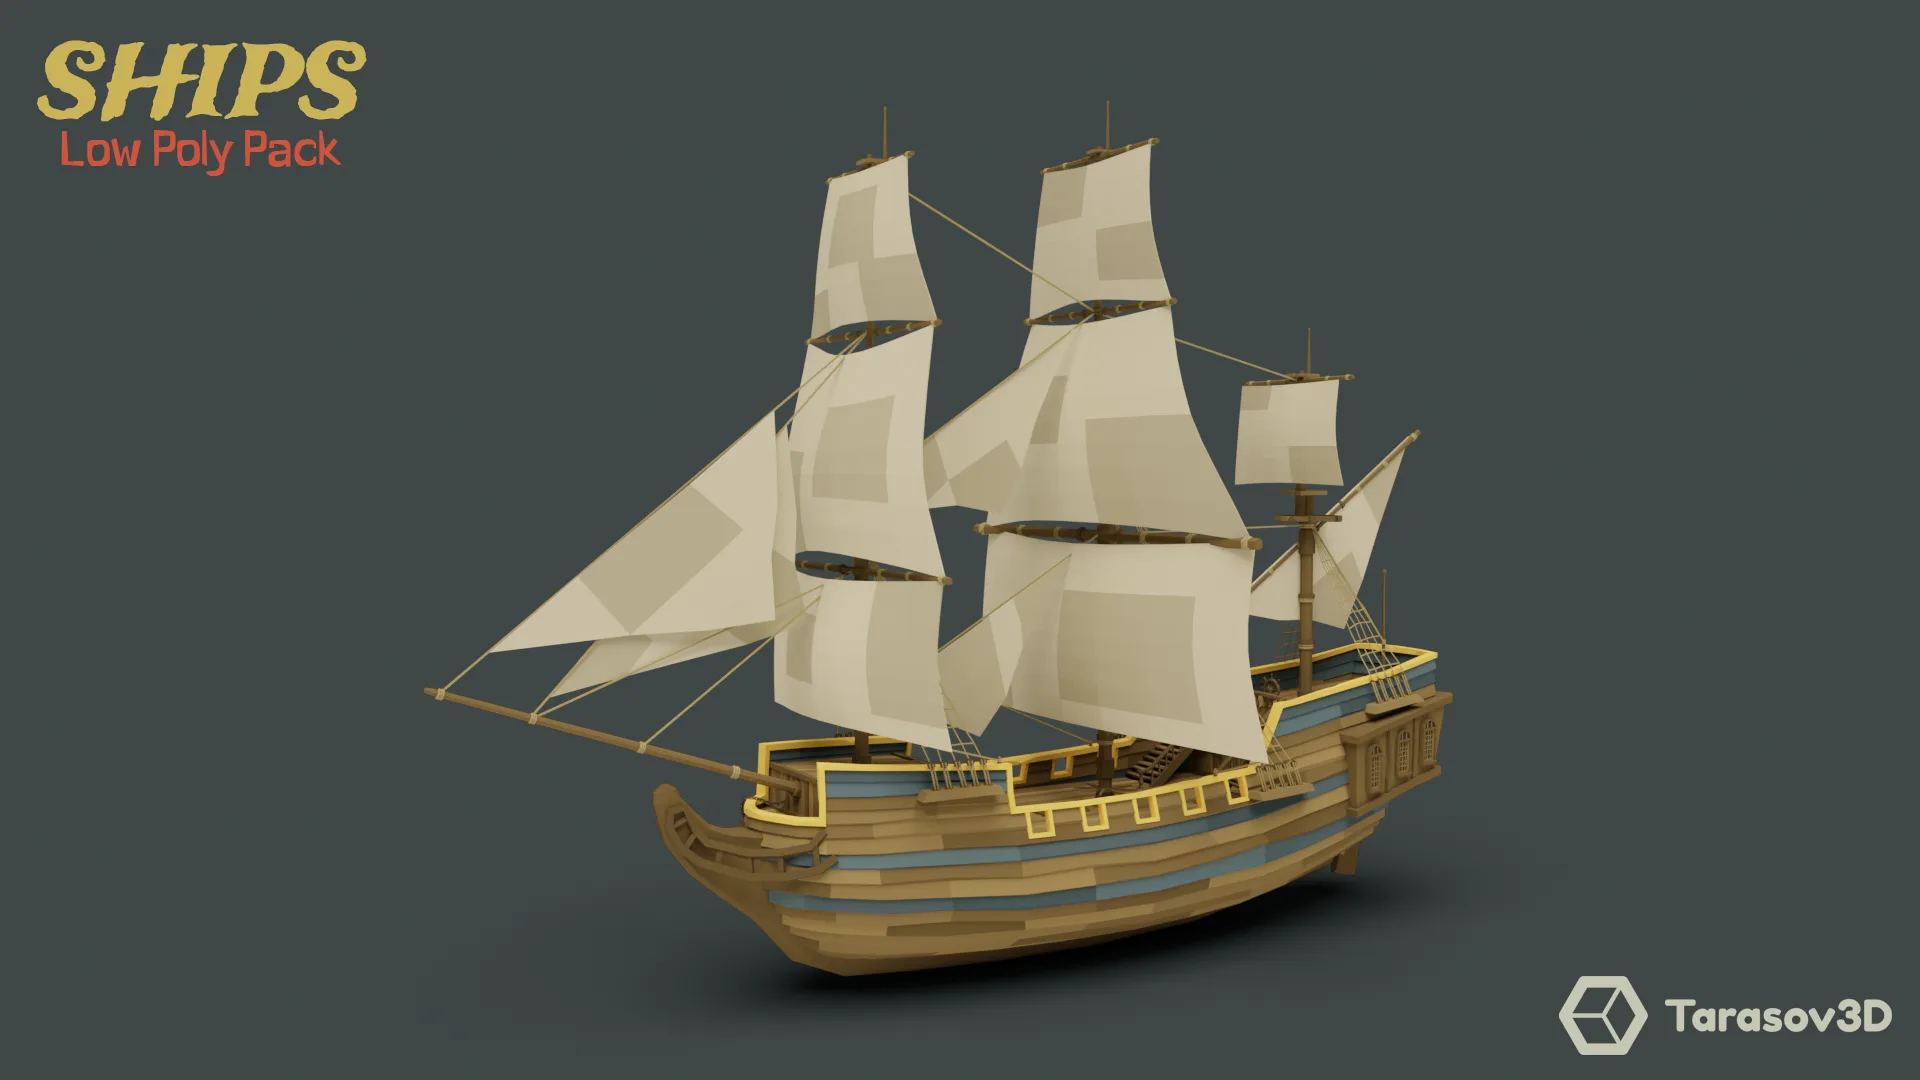 Ships Low Poly Pack